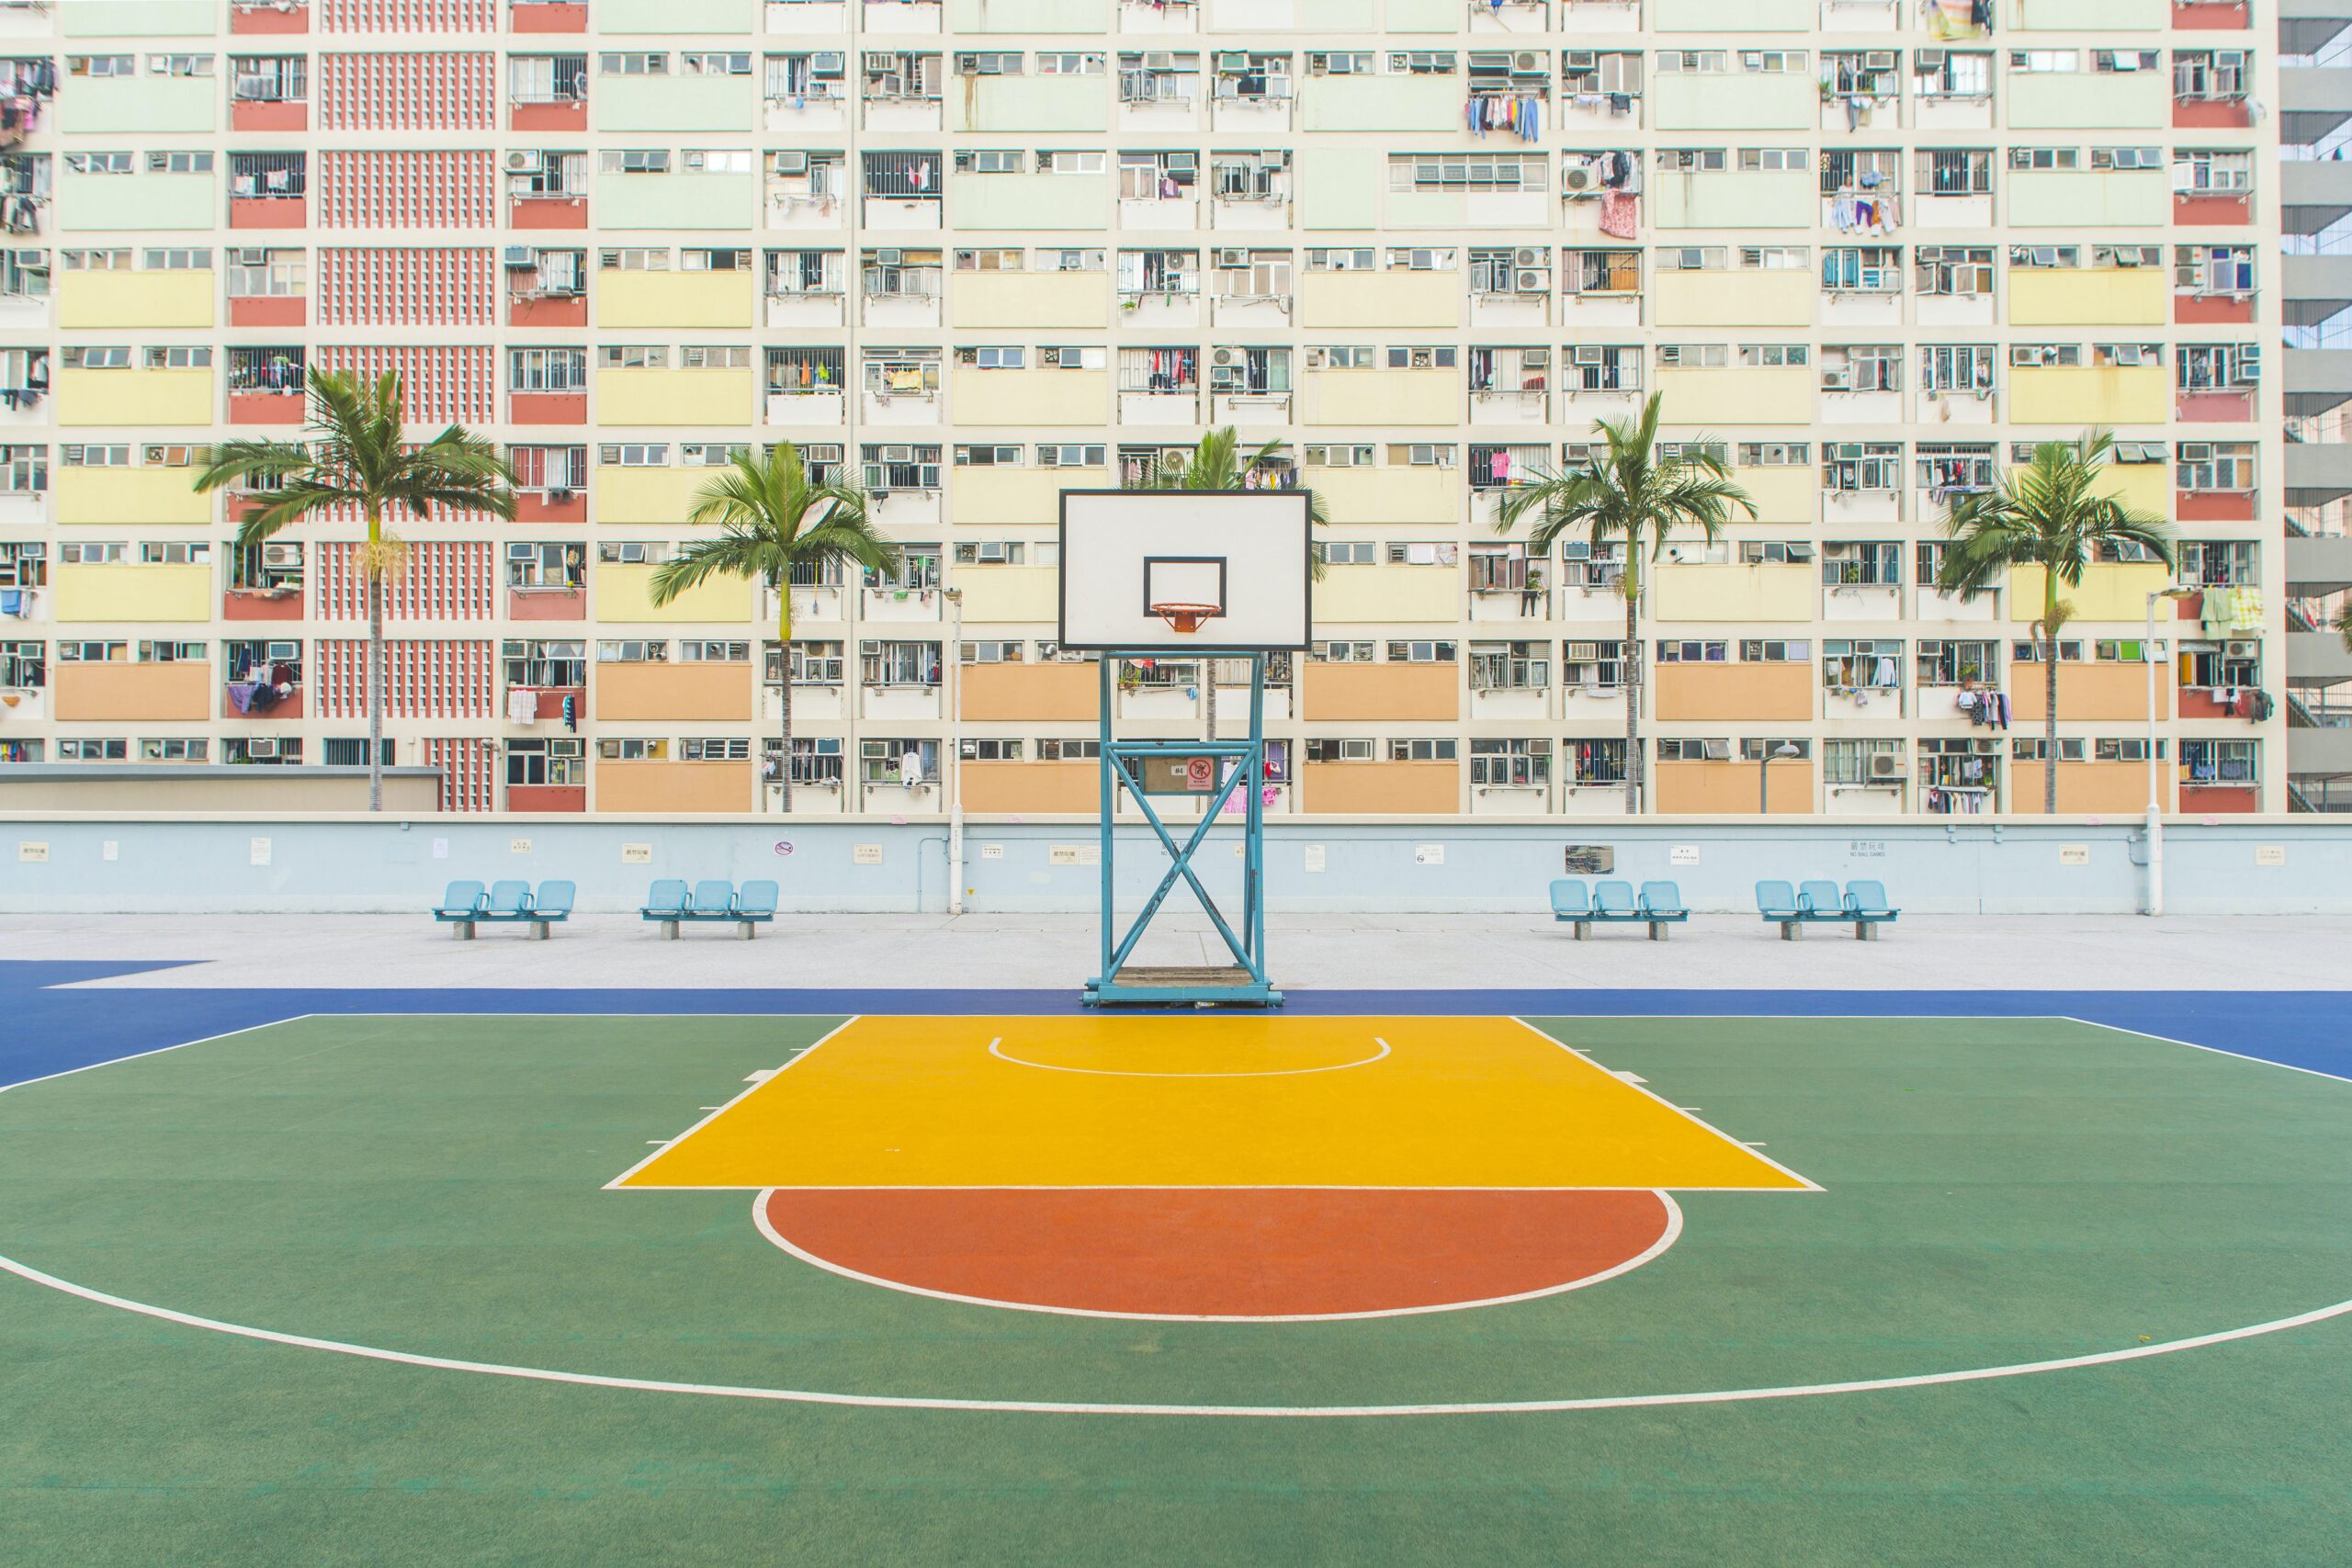 How Can I Find And Use Local Public Basketball Courts Or Sports Facilities?